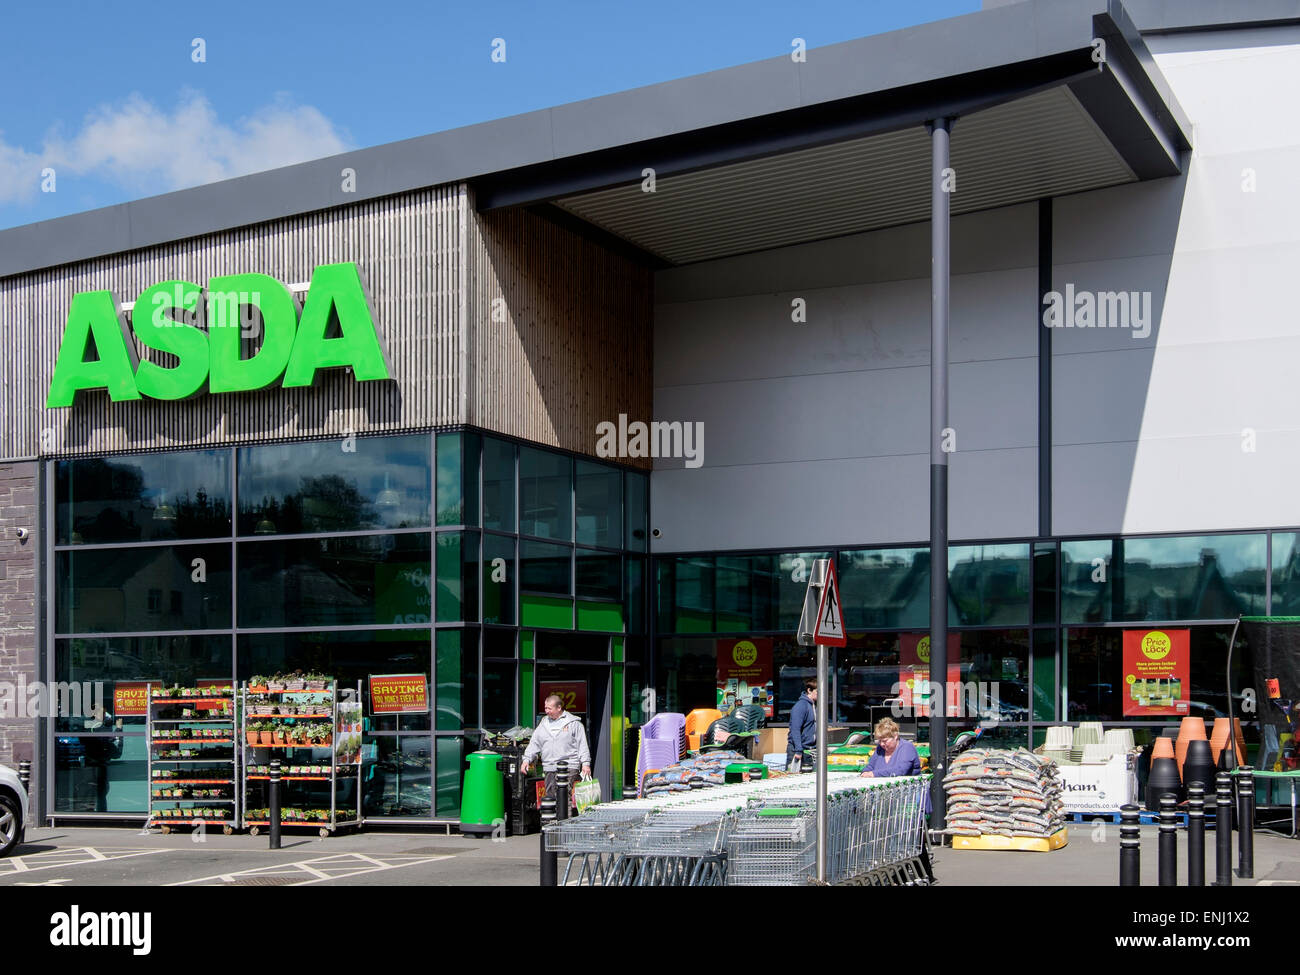 Asda supermarket store entrance with trolleys in car park outside the shop front. Bangor, Gwynedd, Wales, UK, Great Britain Stock Photo